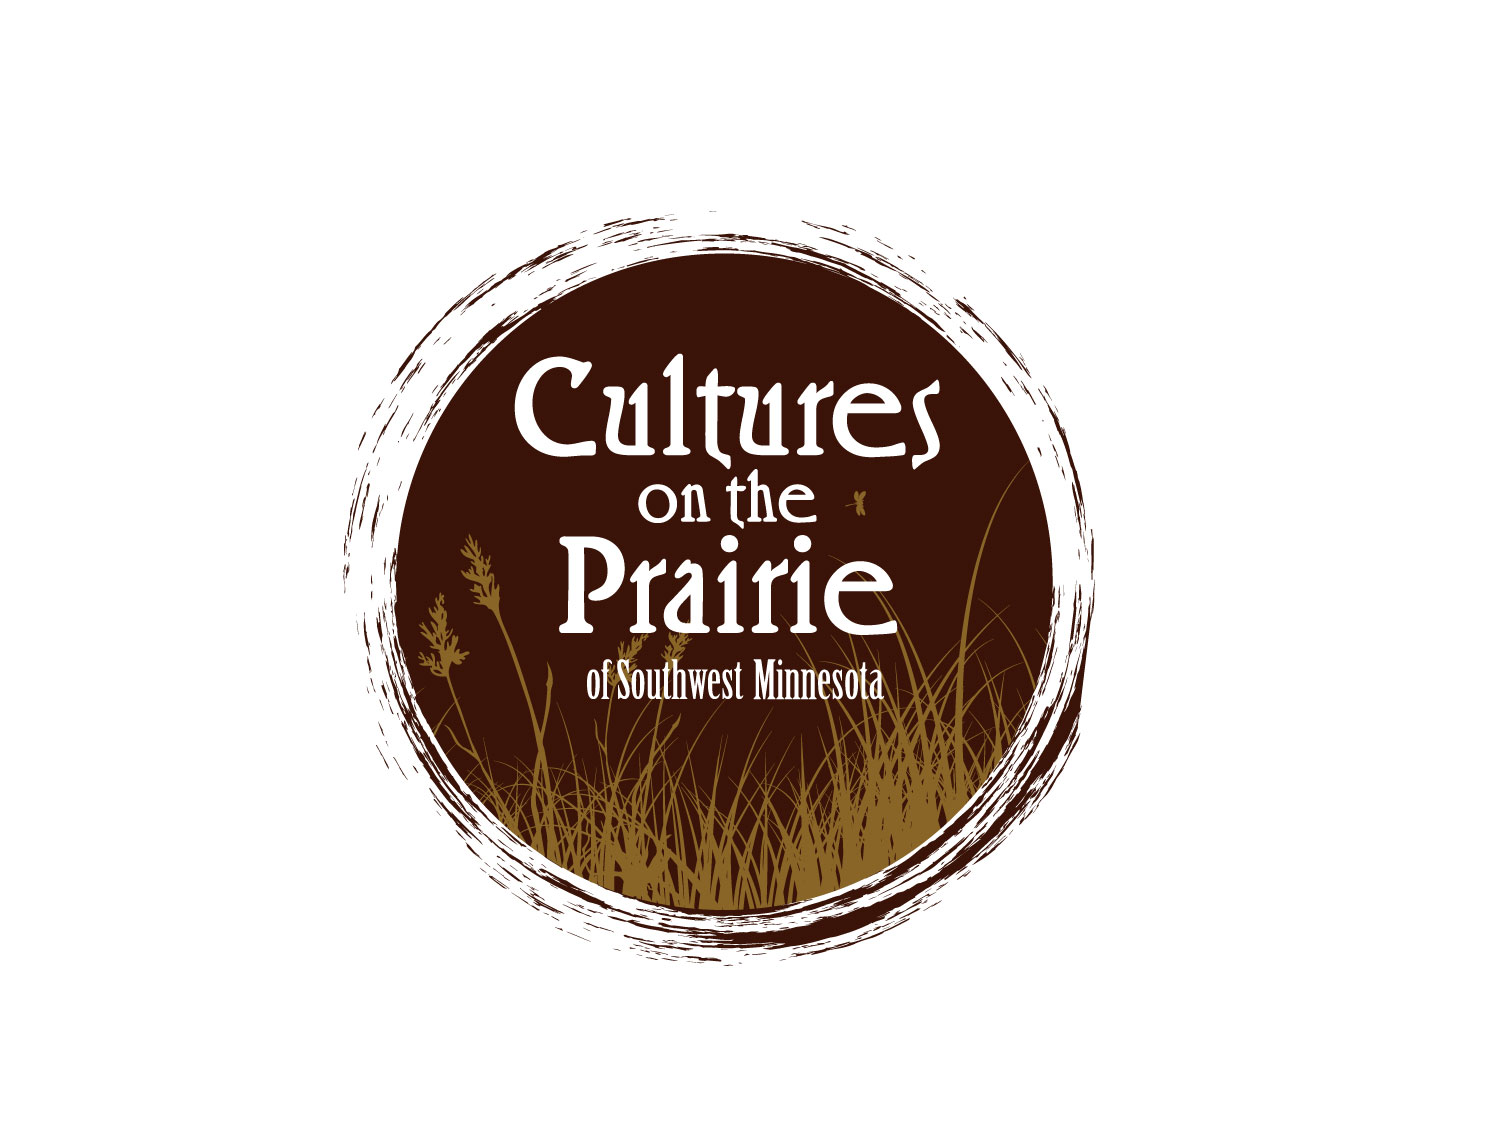 SMSU to Host Cultures on the Prairie, Feb. 13-14 Featured Image